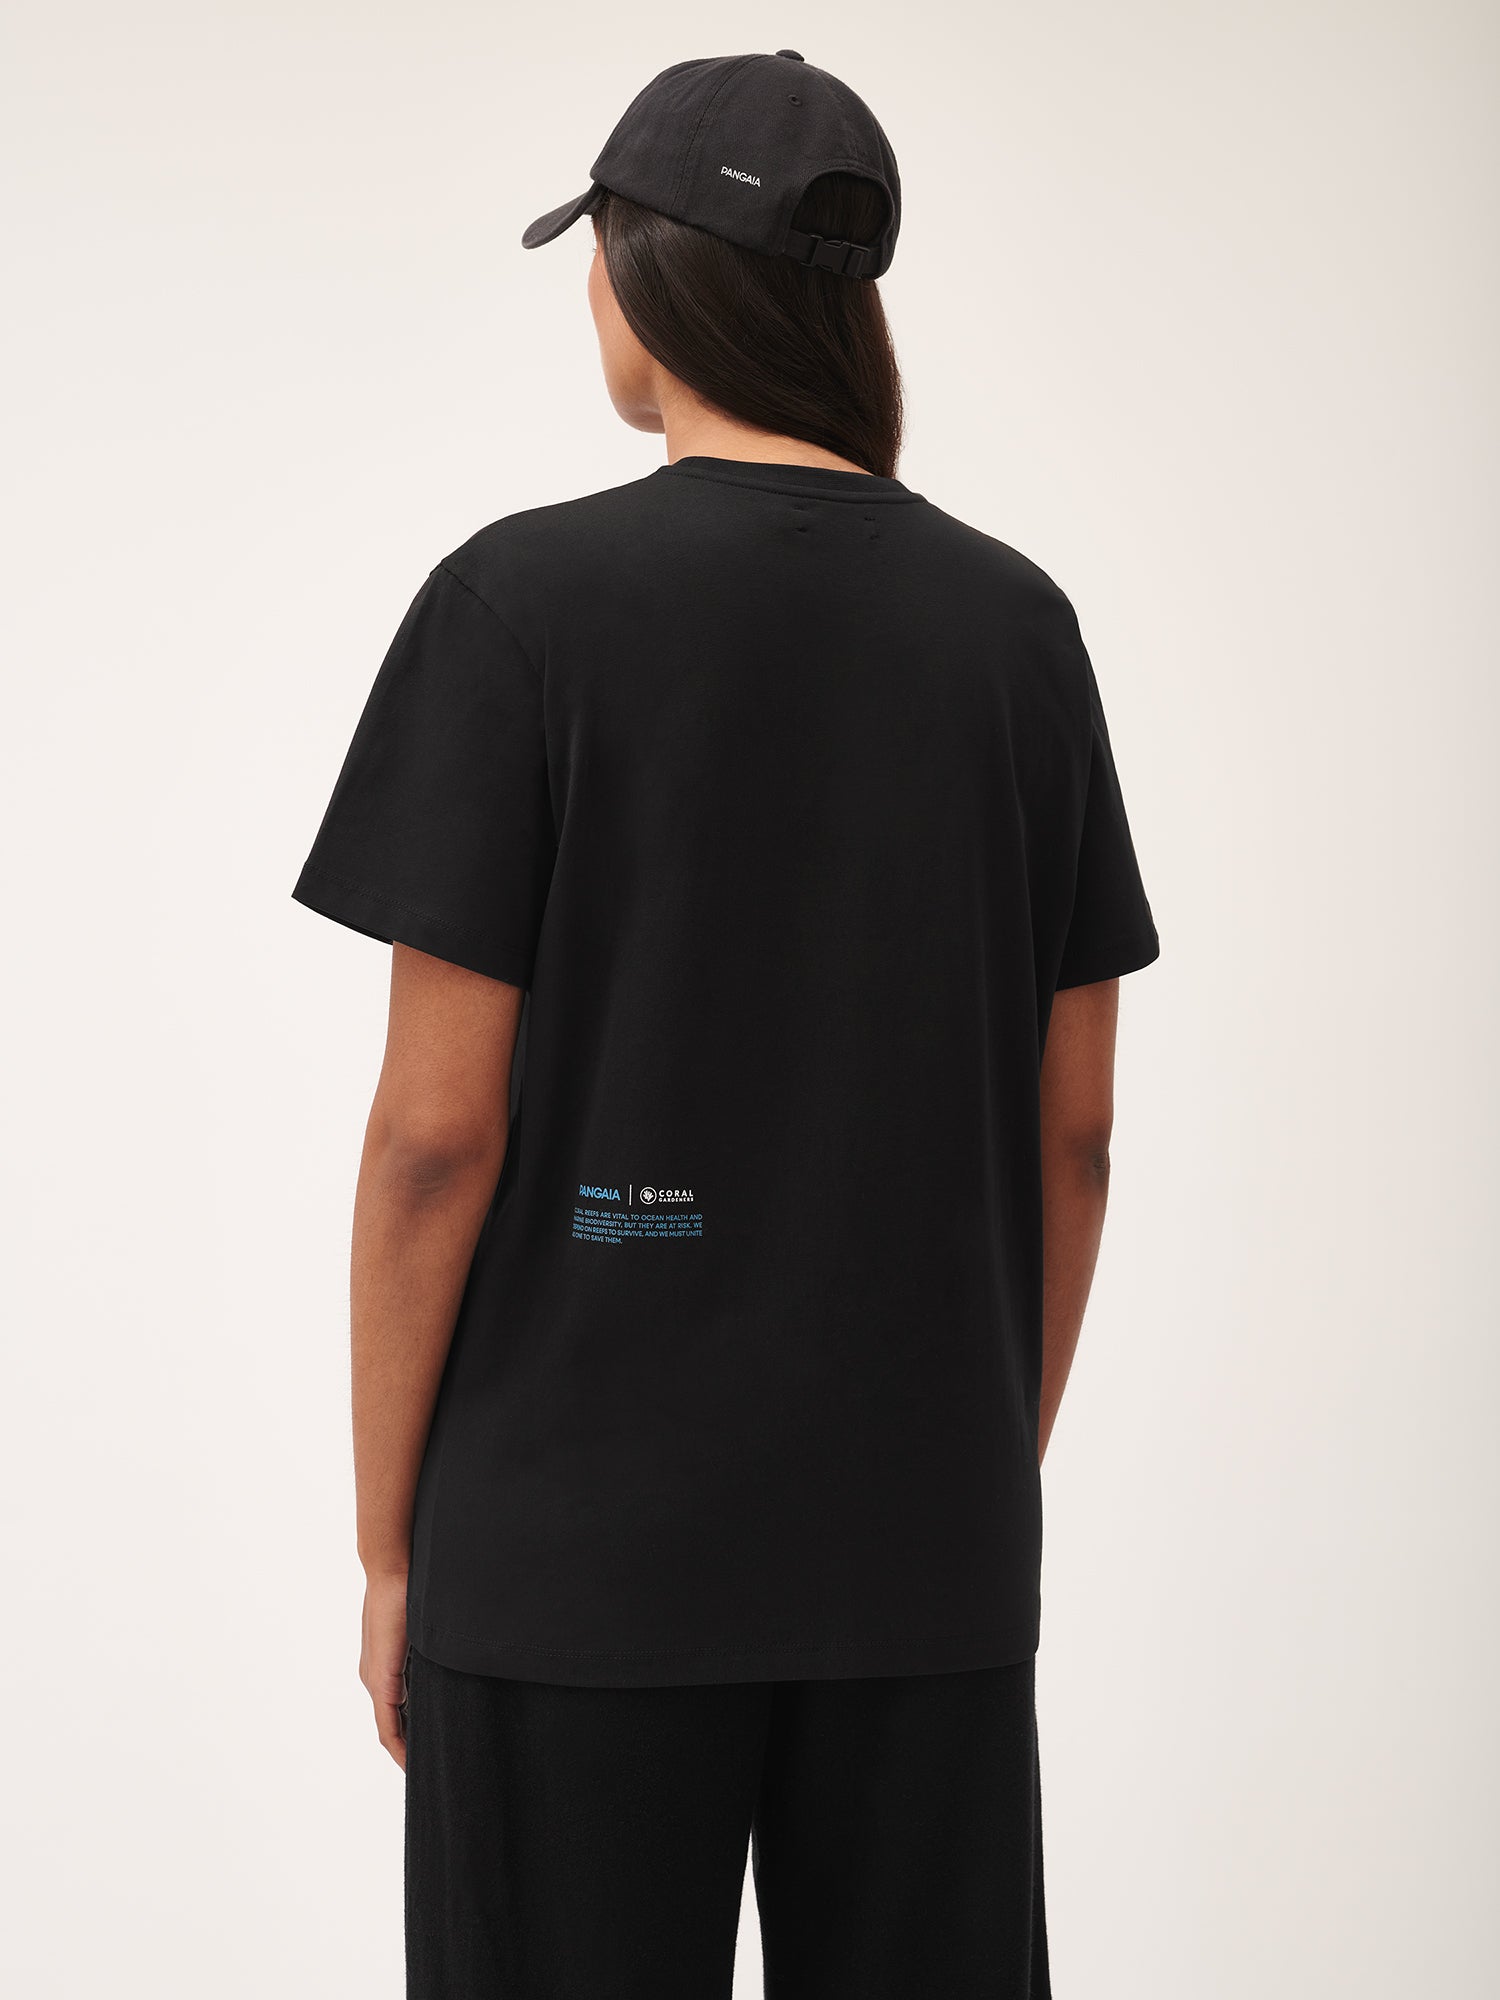 Coral_Gardeners_Midweight_T-Shirt_Black_female-2